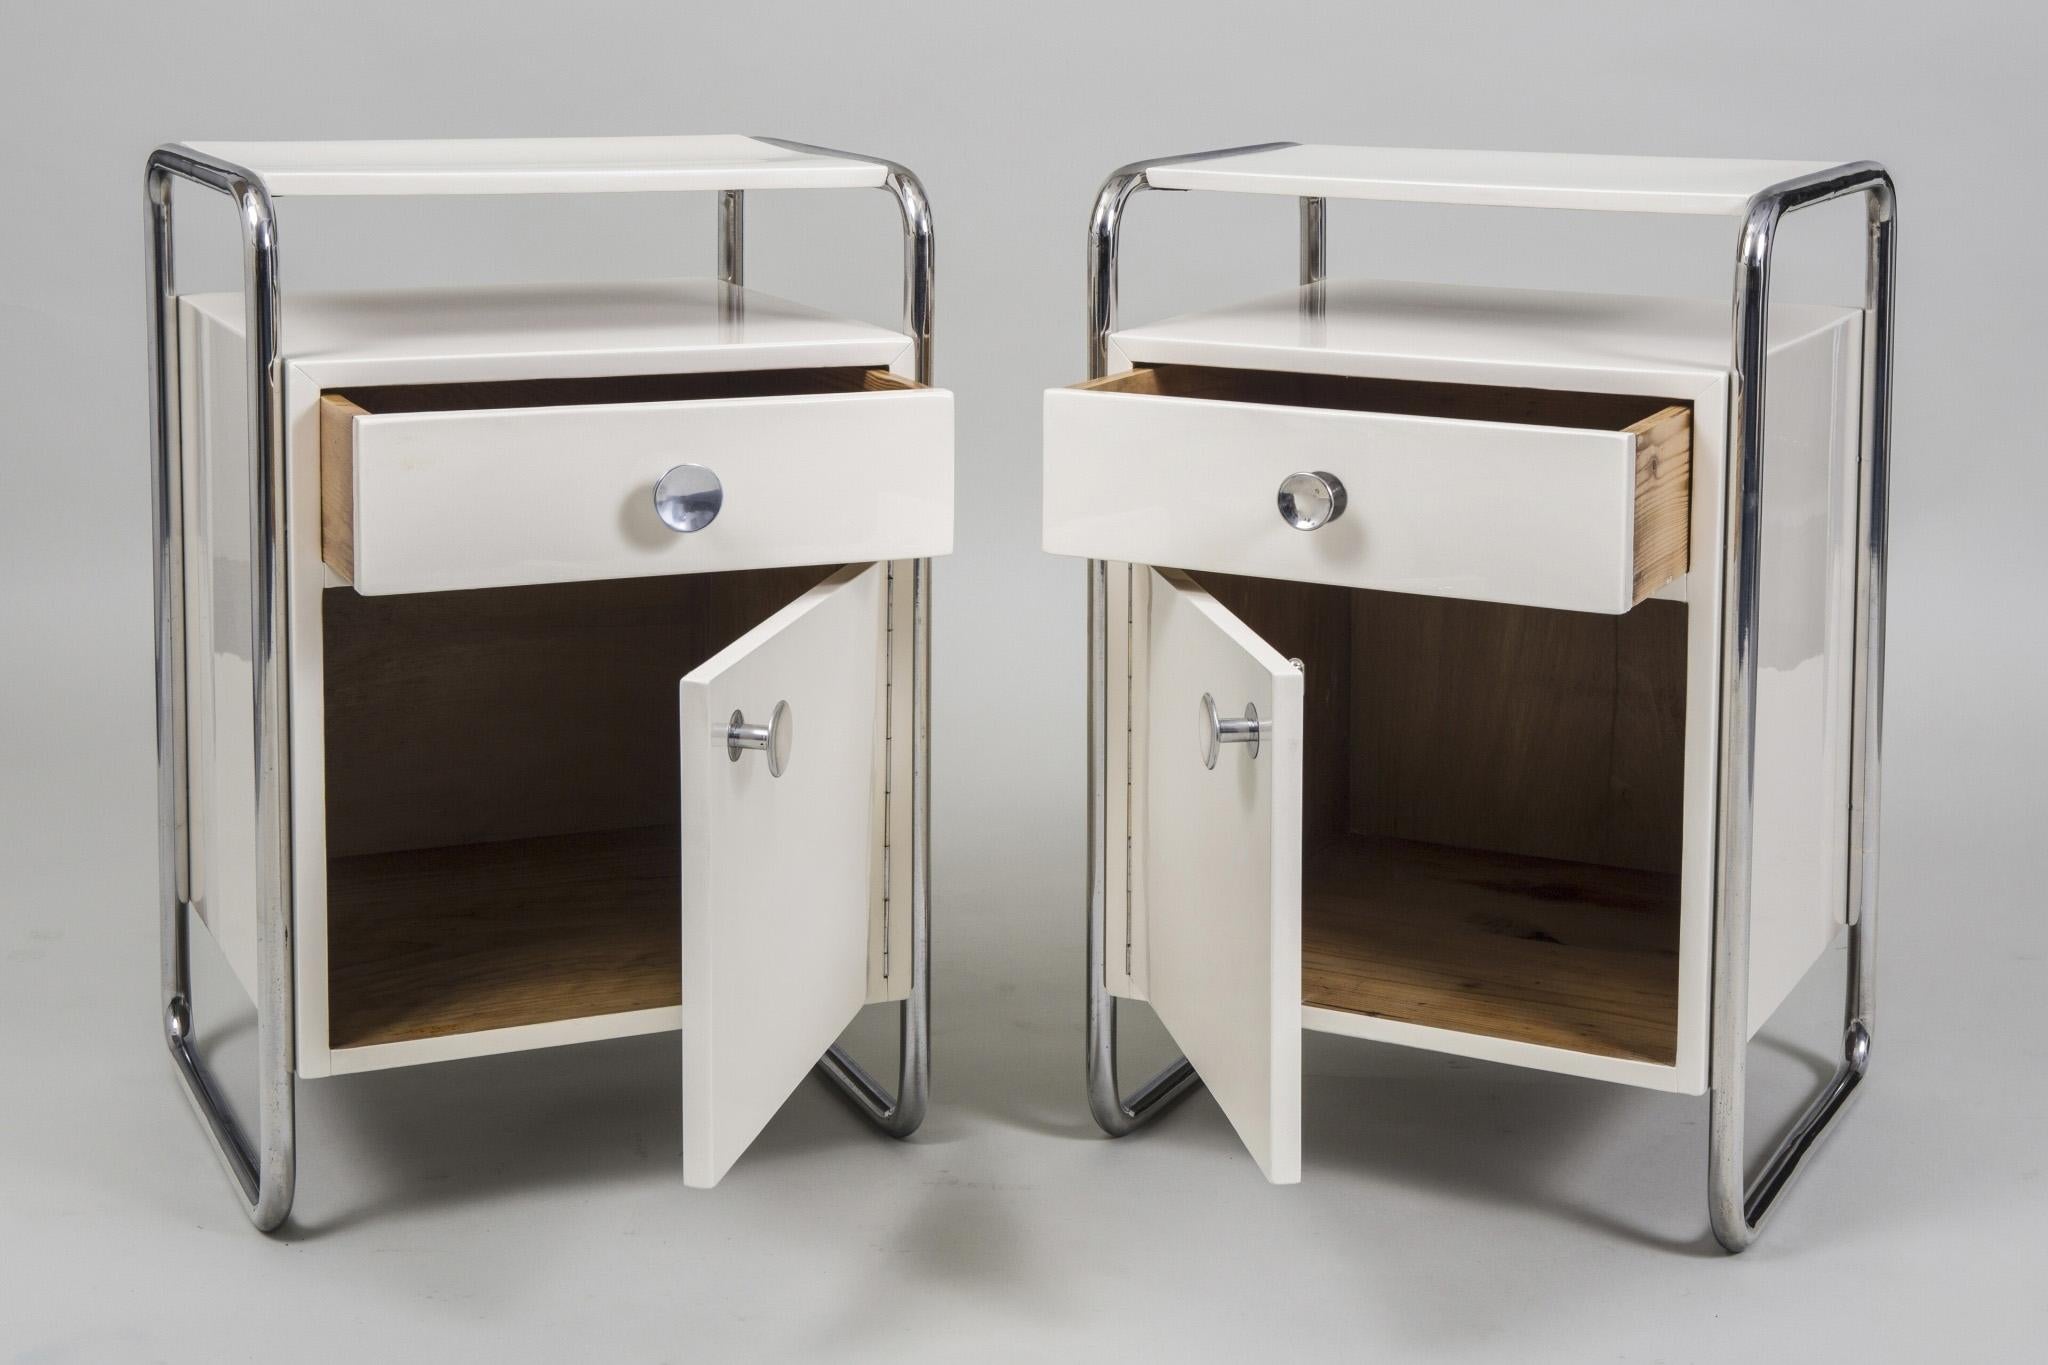 Steel Restored Bauhaus Pair of Bed-Side Tables, by Sab, Chrome, Wood, Czech, 1930s For Sale